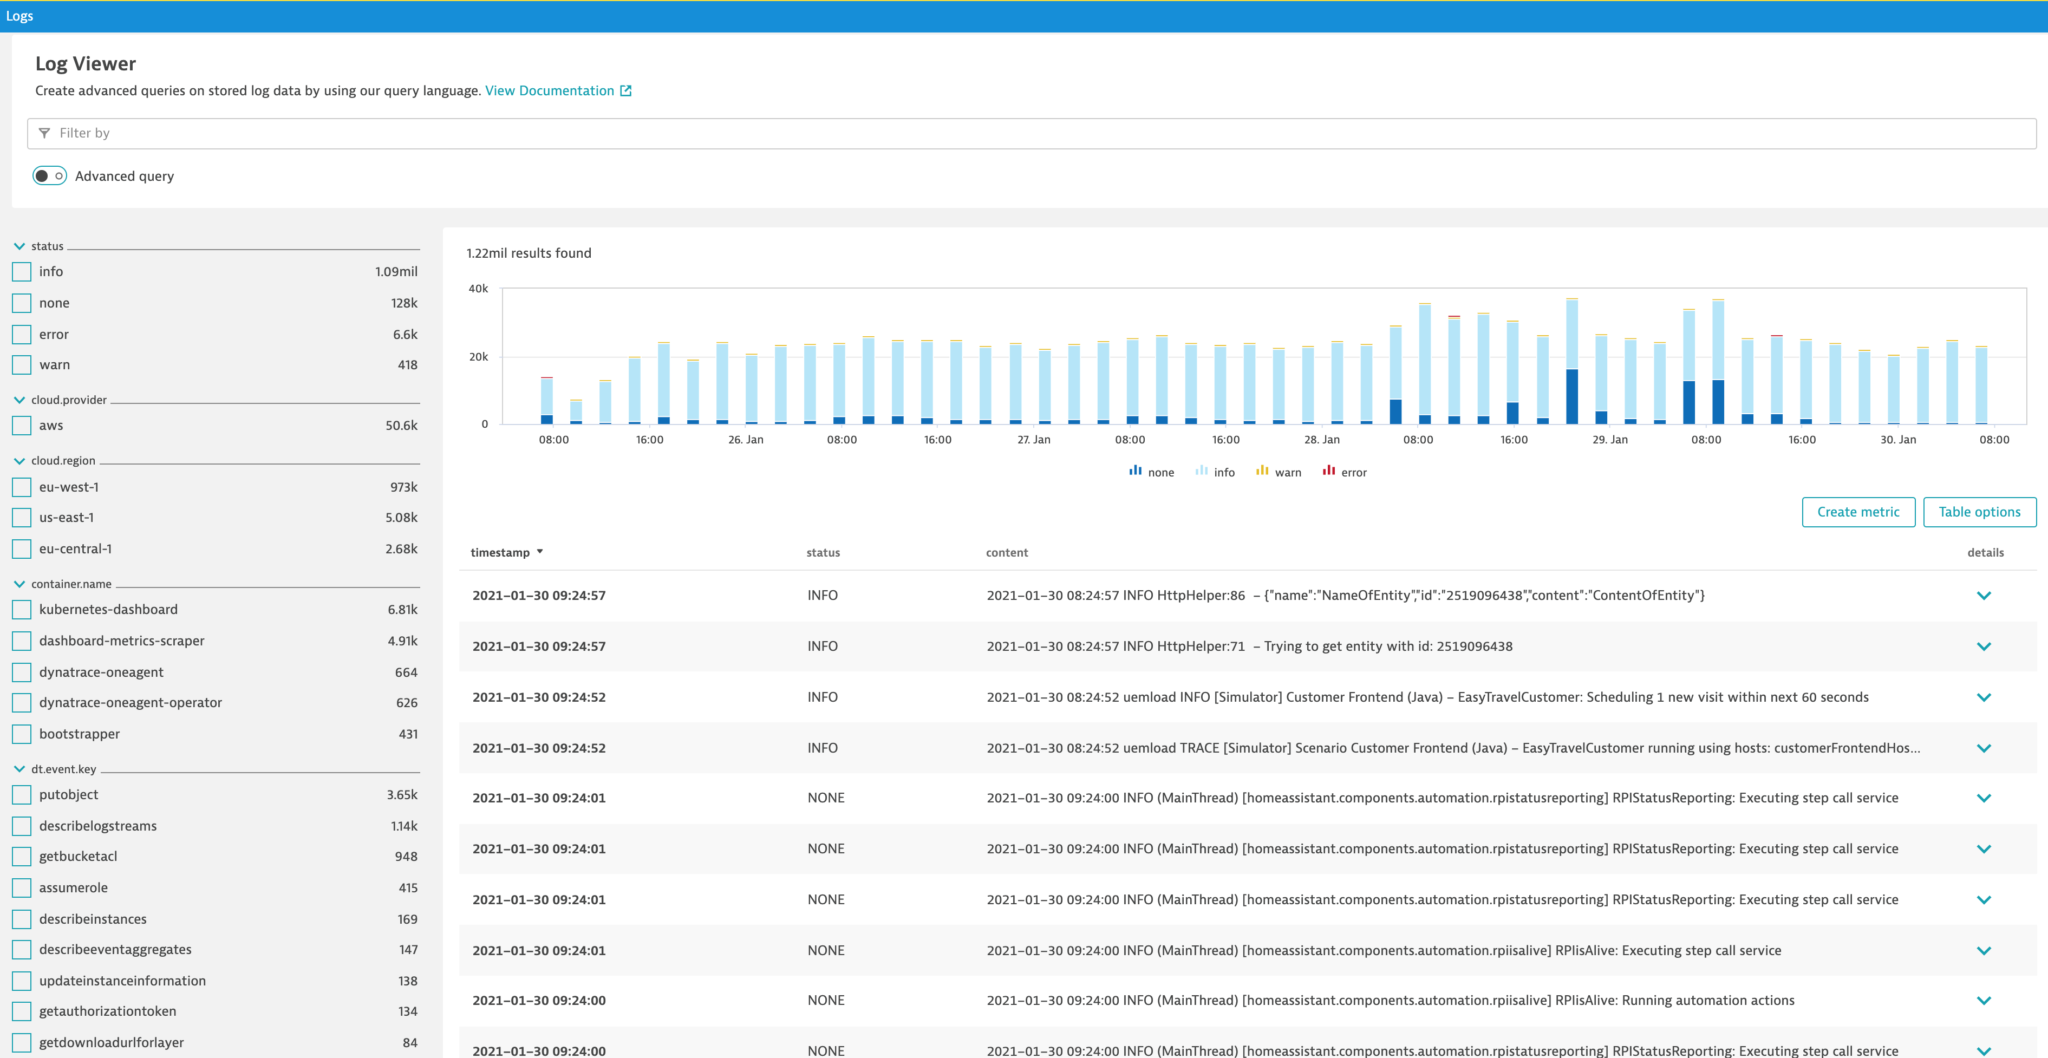 Explore your logs in multi-cloud environments and analyze them in context of your architecture.